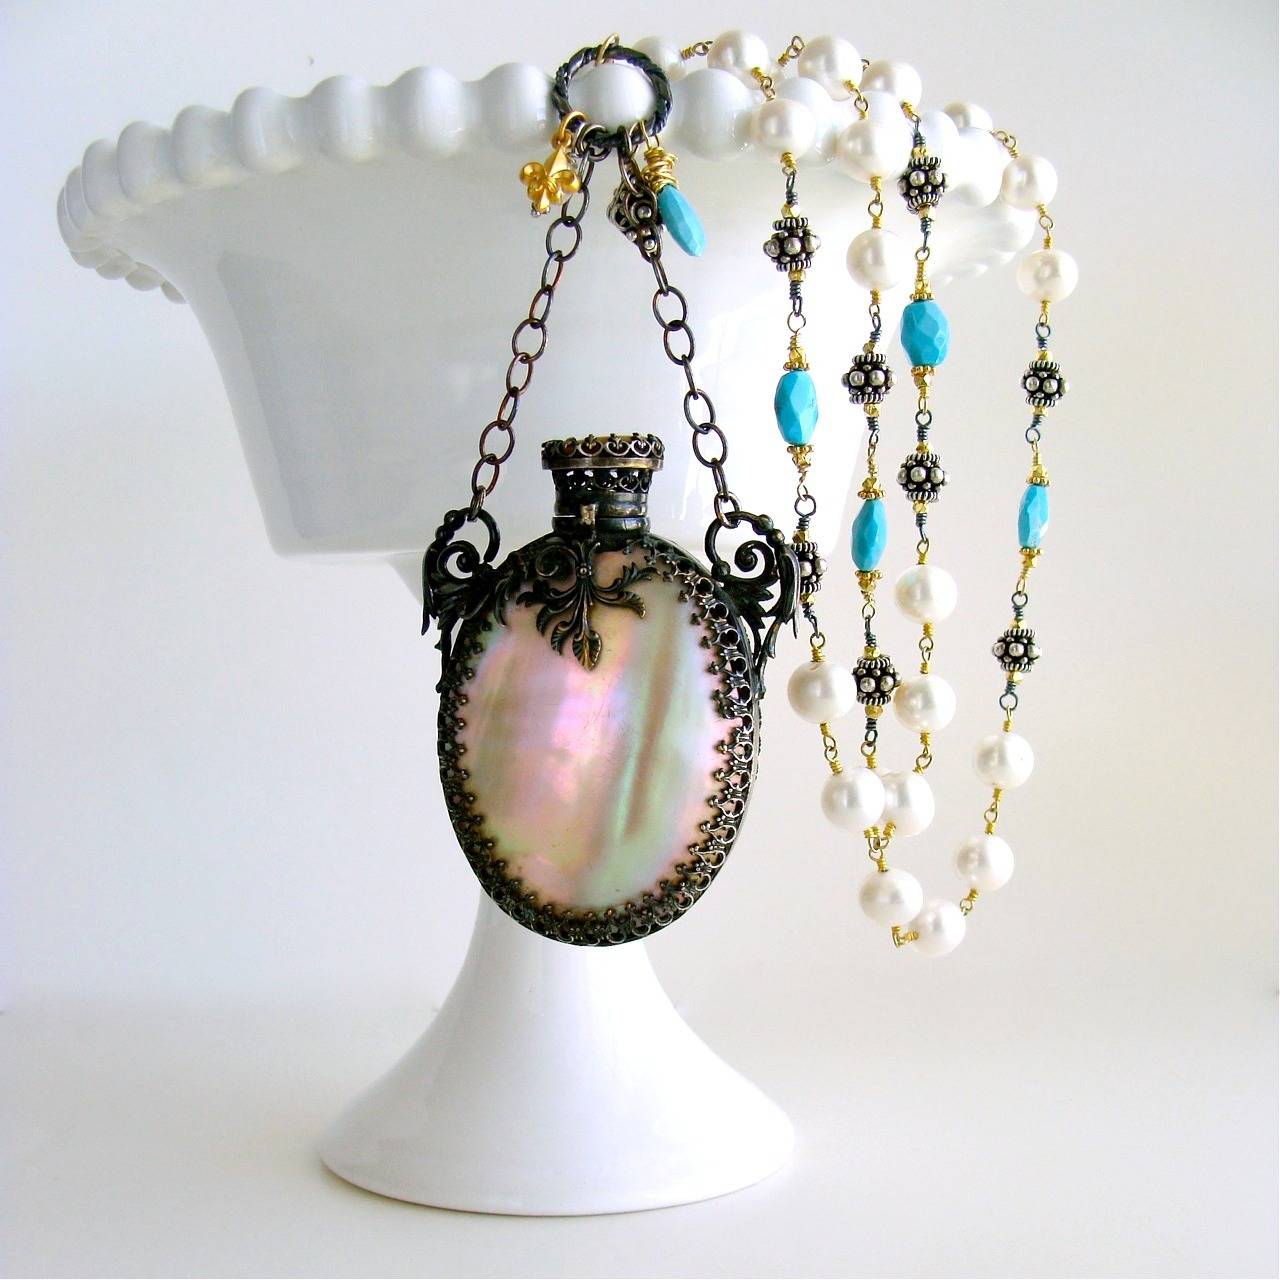 Alana Necklace.

A stunning Mother of Pearl Victorian scent bottle - embellished with  oxidized silver cartouche - has now become the featured pendant of this new necklace design.  The original finger loop and chain have been replaced, as they